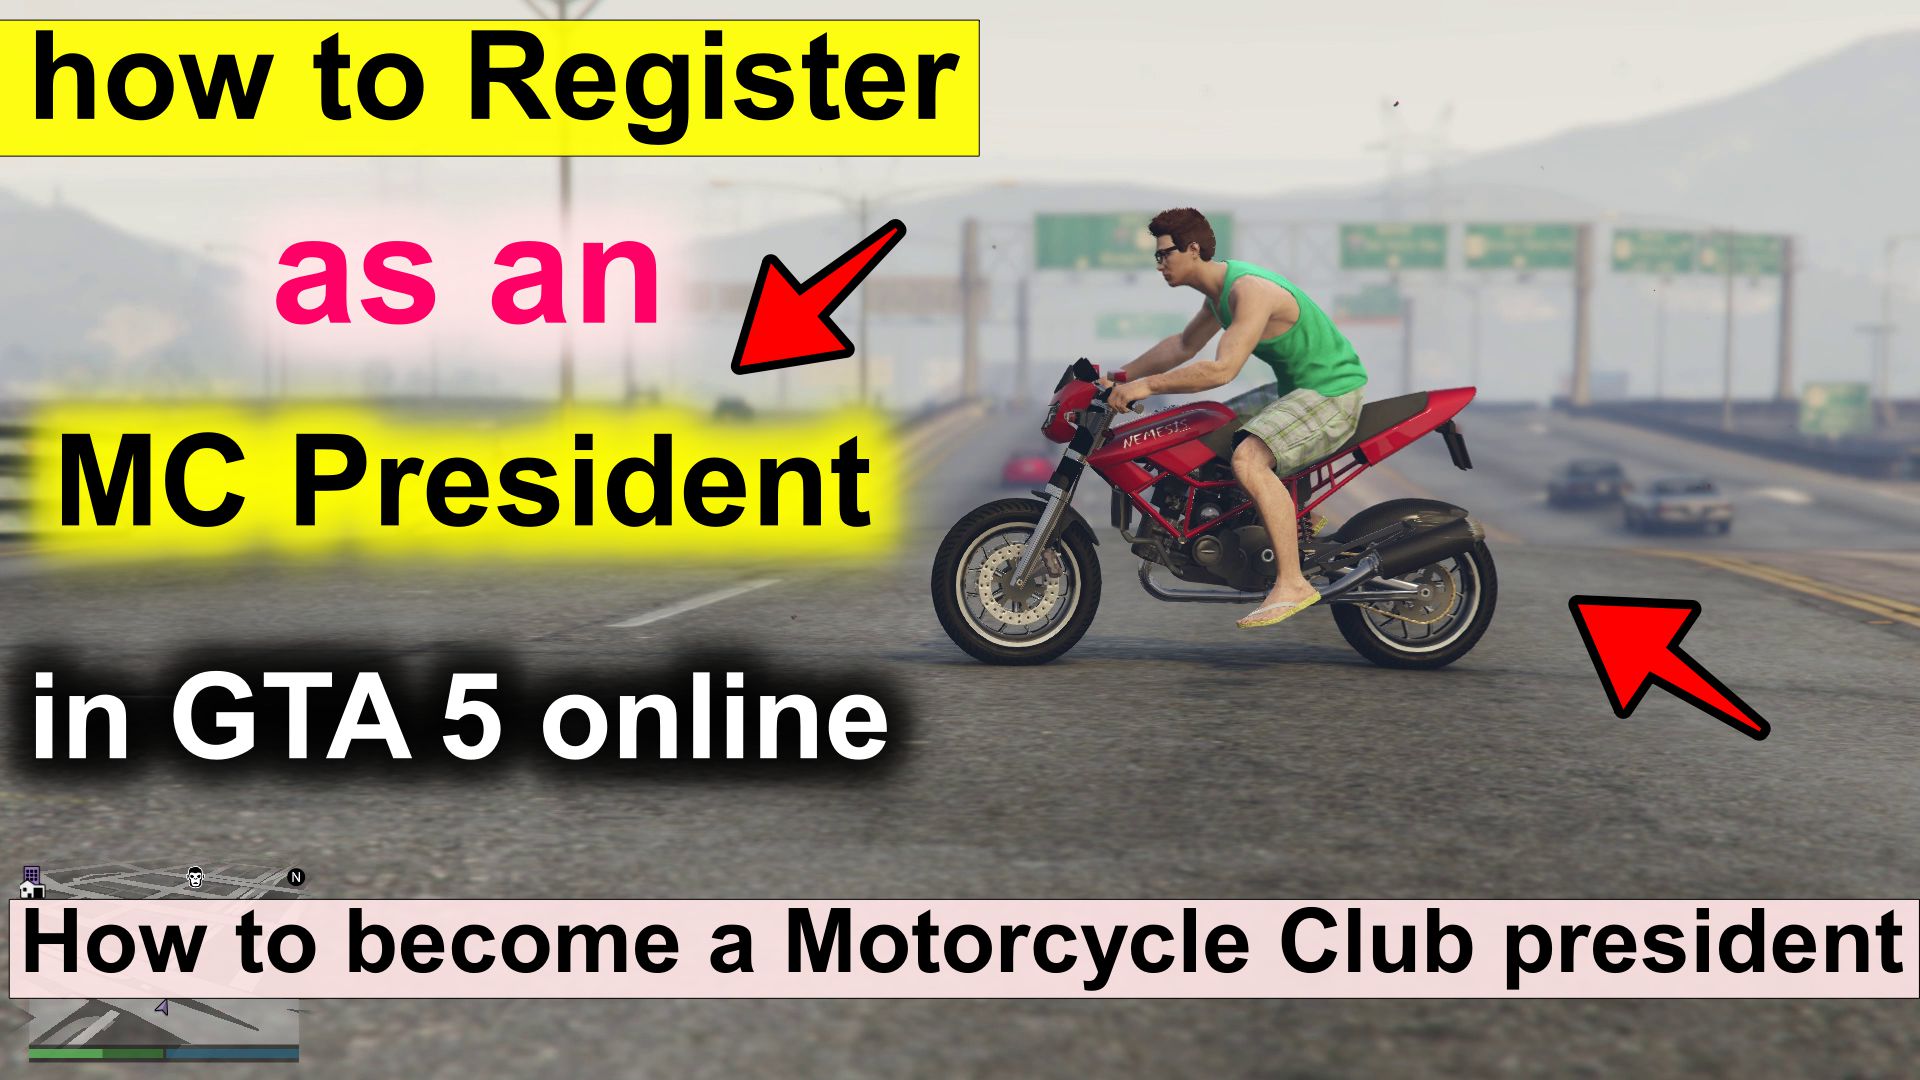 how to Register as an MC President (Motorcycle Club president) -  (How to become an MC president)